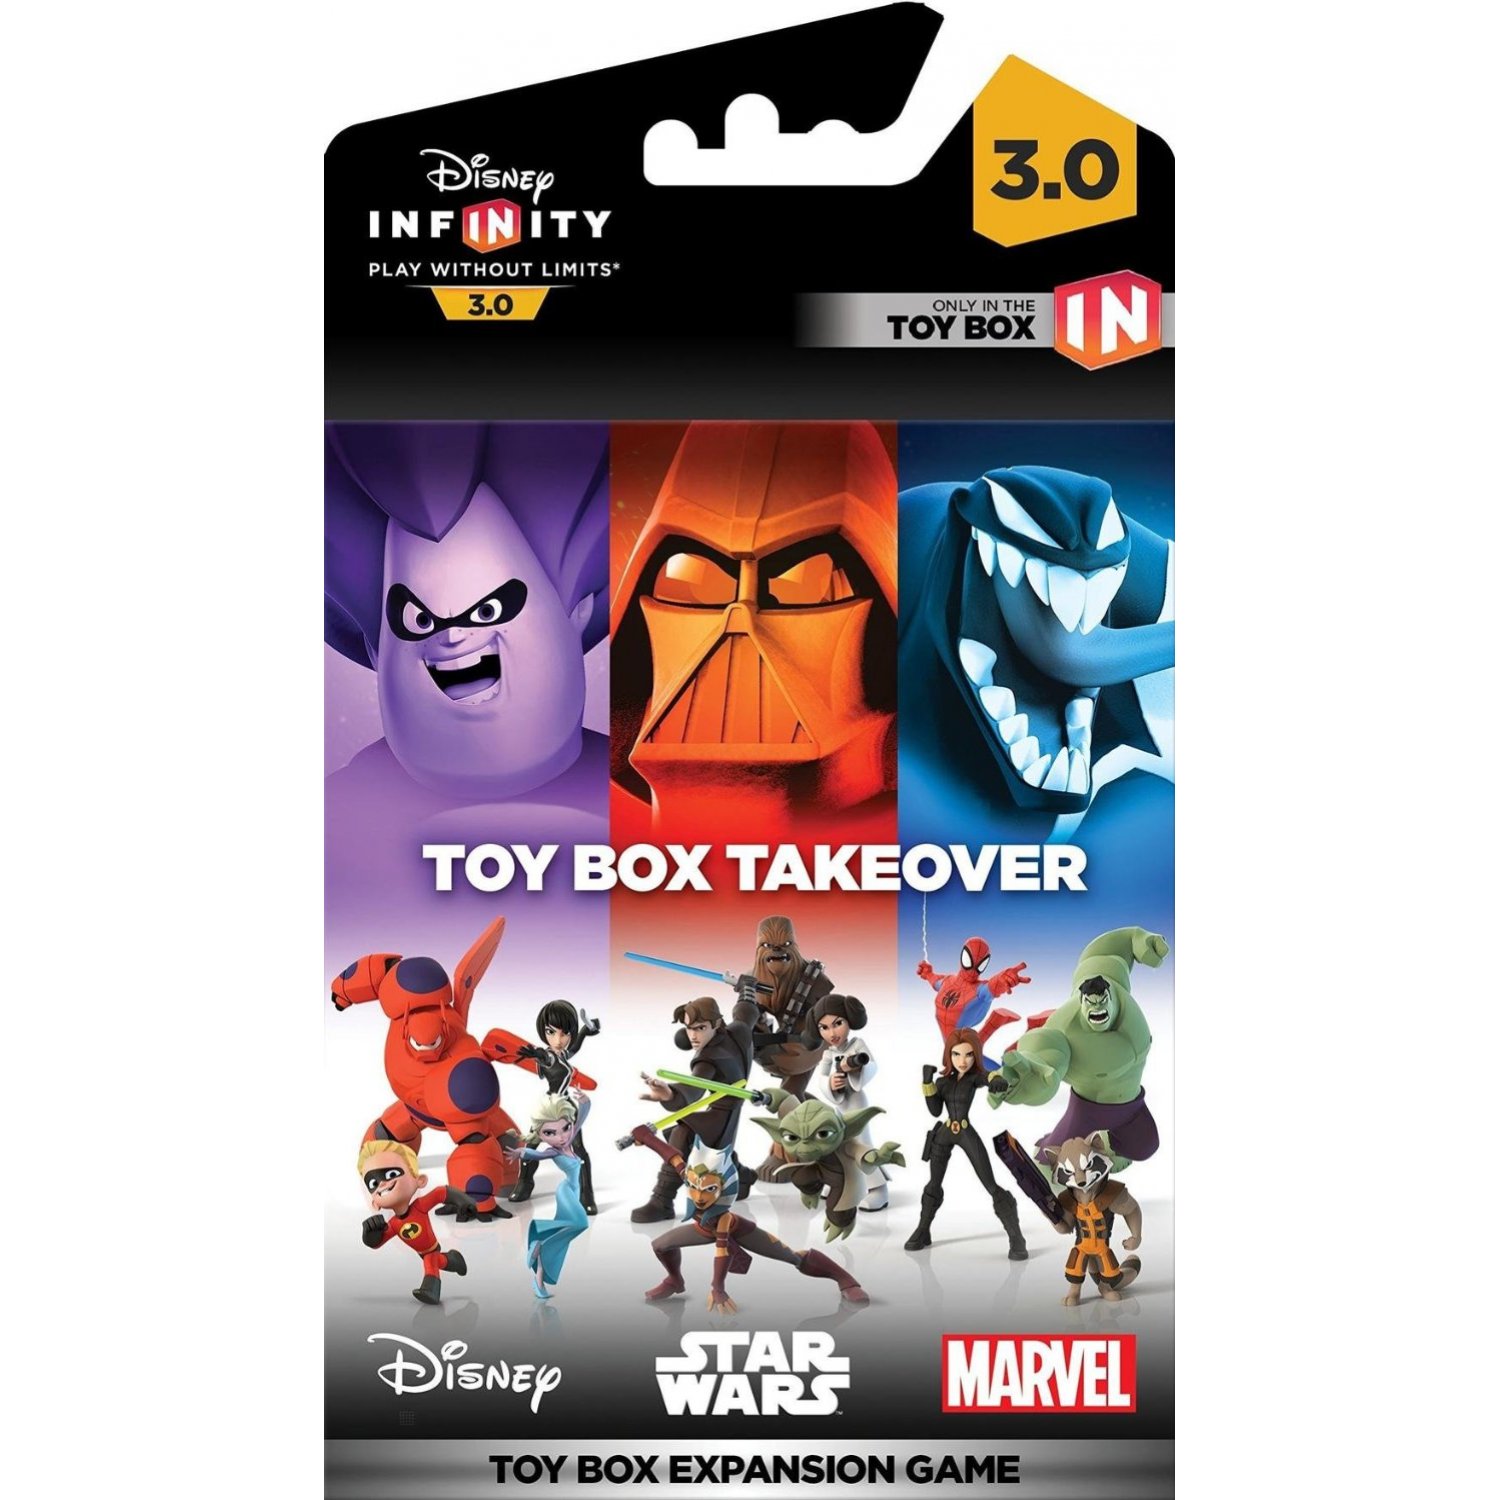 disney-infinity-3-0-edition-toy-box-takeover-toy-box-expansion-g-424757.1